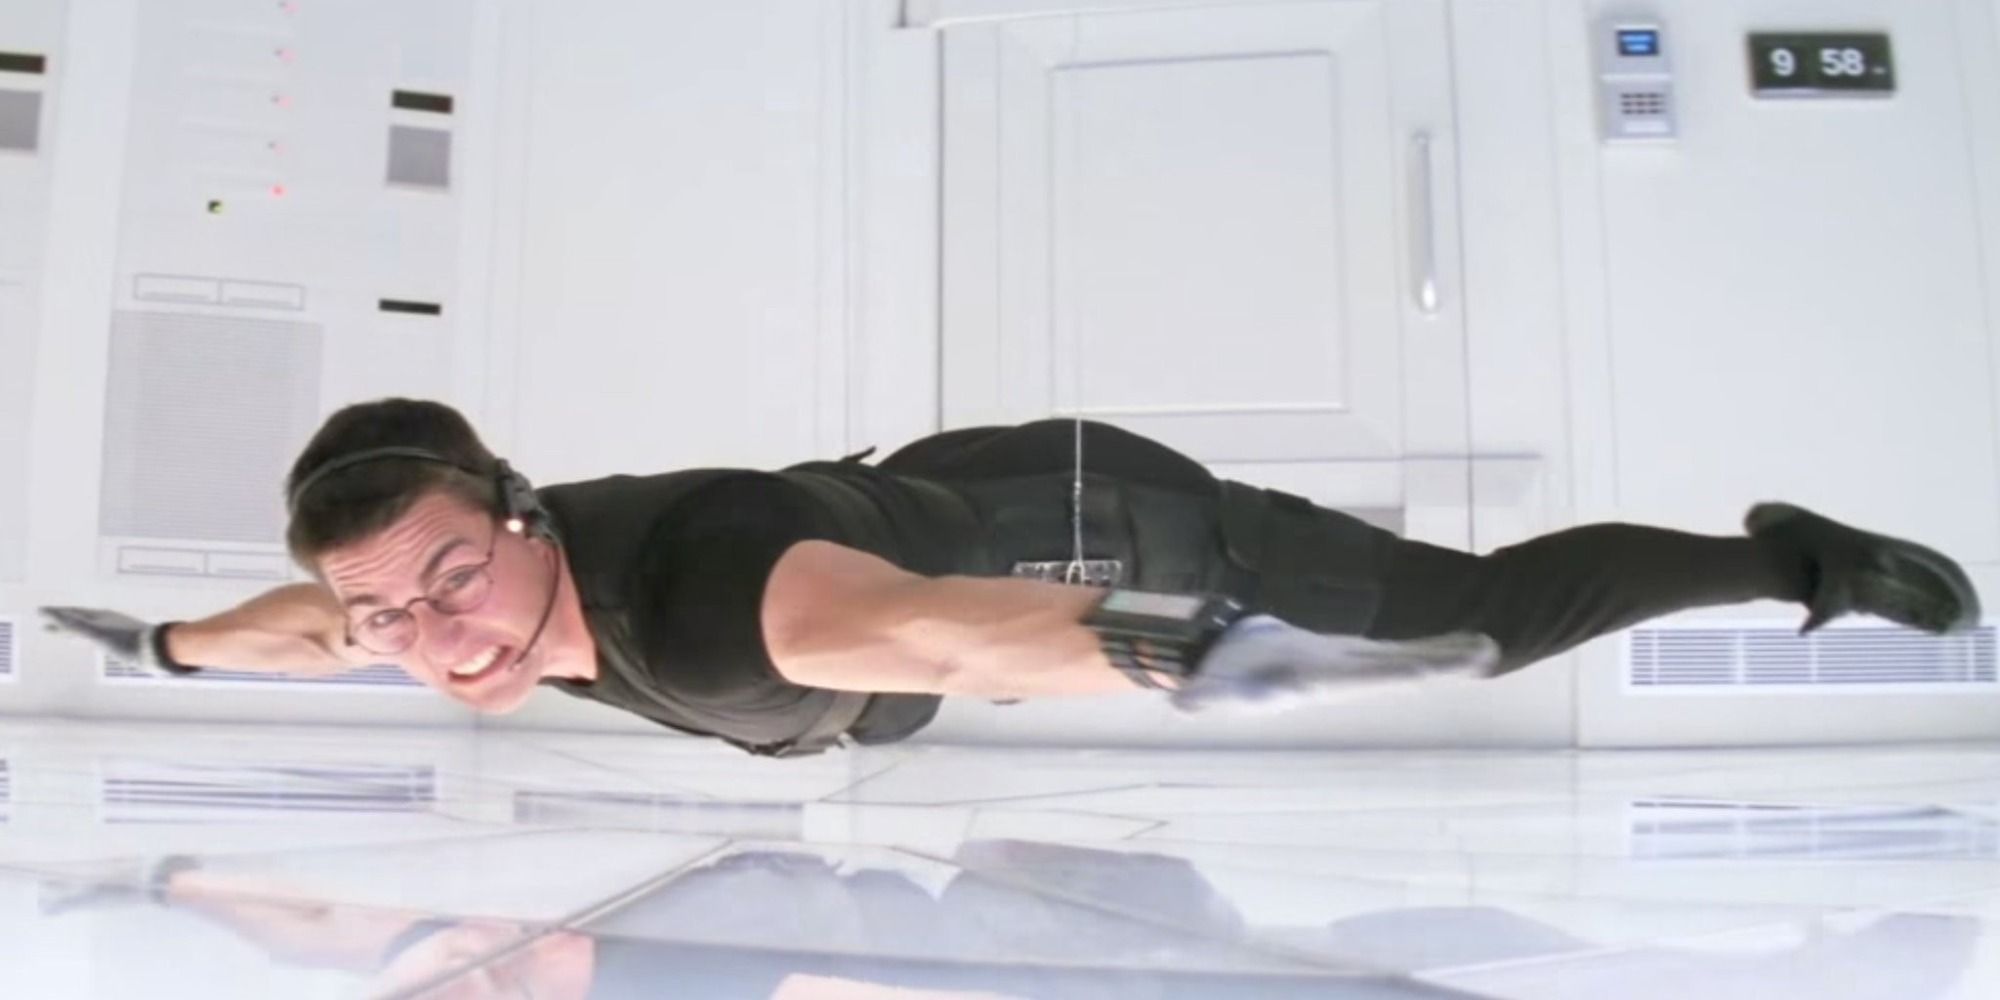 Ethan Hunt broke into the CIA through the ceiling 